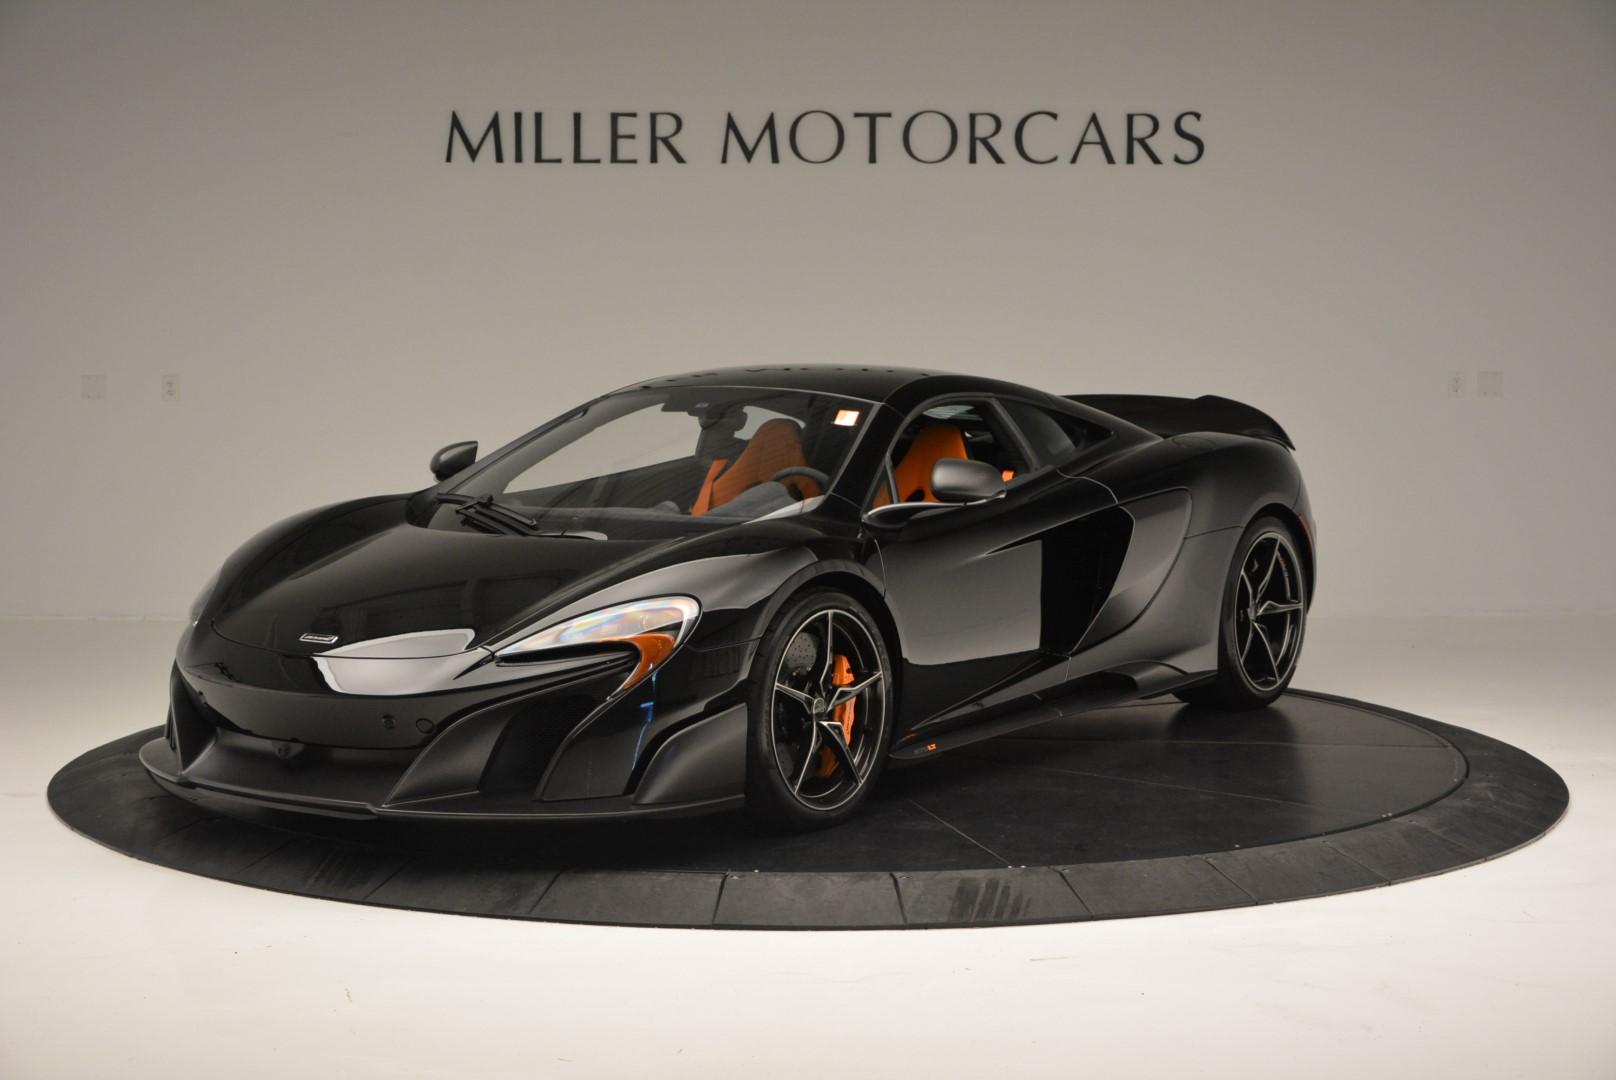 Used 2016 McLaren 675LT for sale Sold at McLaren Greenwich in Greenwich CT 06830 1